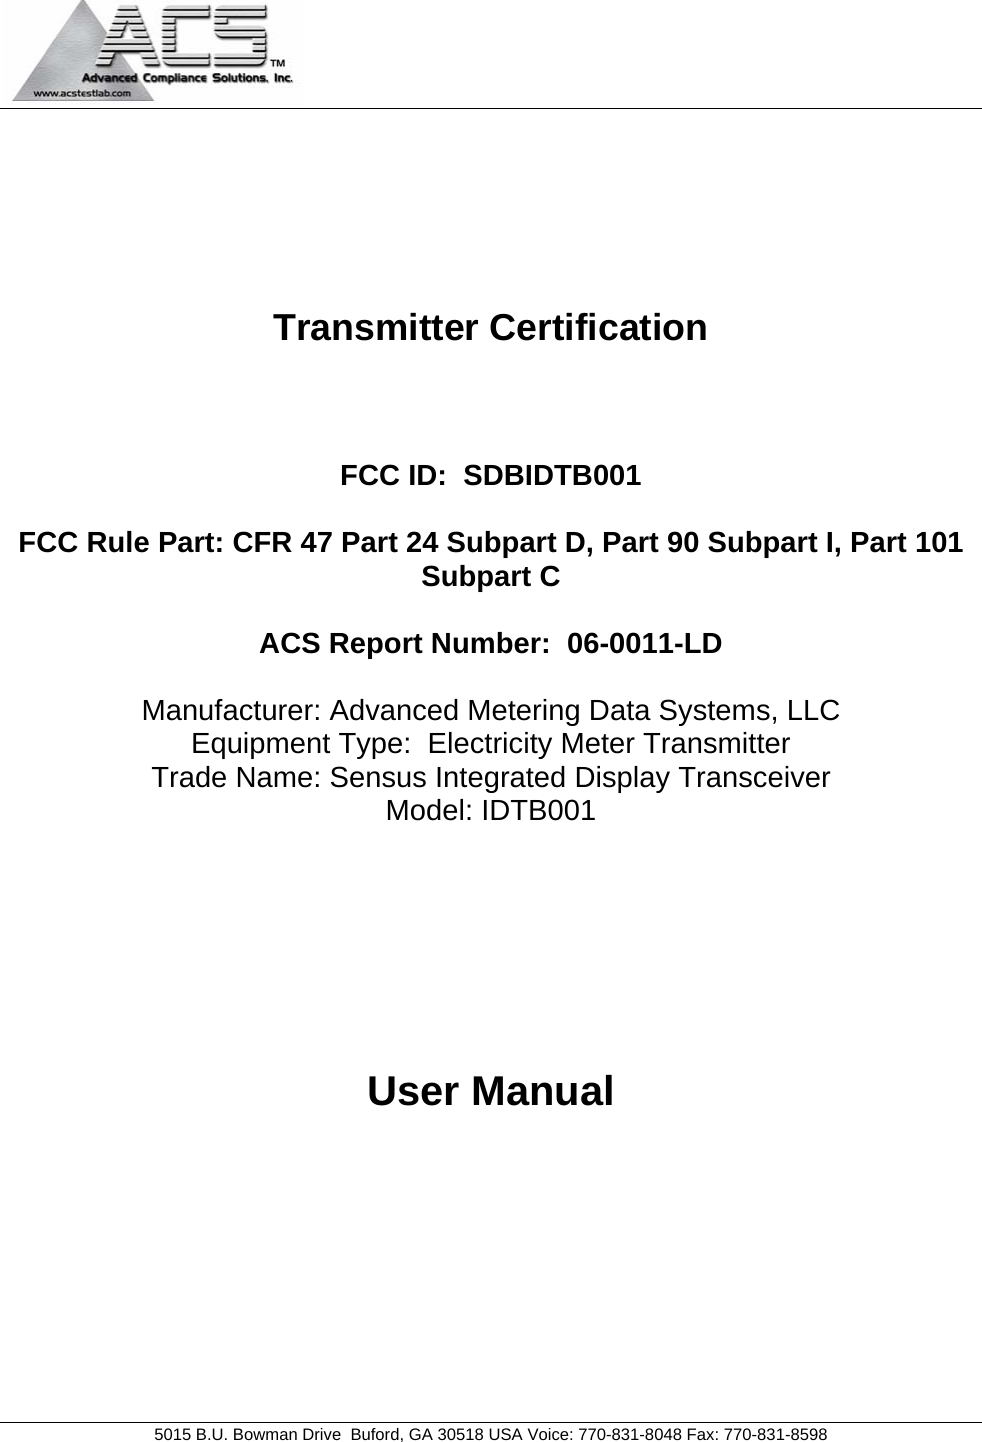                                            5015 B.U. Bowman Drive  Buford, GA 30518 USA Voice: 770-831-8048 Fax: 770-831-8598       Transmitter Certification    FCC ID:  SDBIDTB001  FCC Rule Part: CFR 47 Part 24 Subpart D, Part 90 Subpart I, Part 101 Subpart C  ACS Report Number:  06-0011-LD   Manufacturer: Advanced Metering Data Systems, LLC Equipment Type:  Electricity Meter Transmitter Trade Name: Sensus Integrated Display Transceiver Model: IDTB001      User Manual 